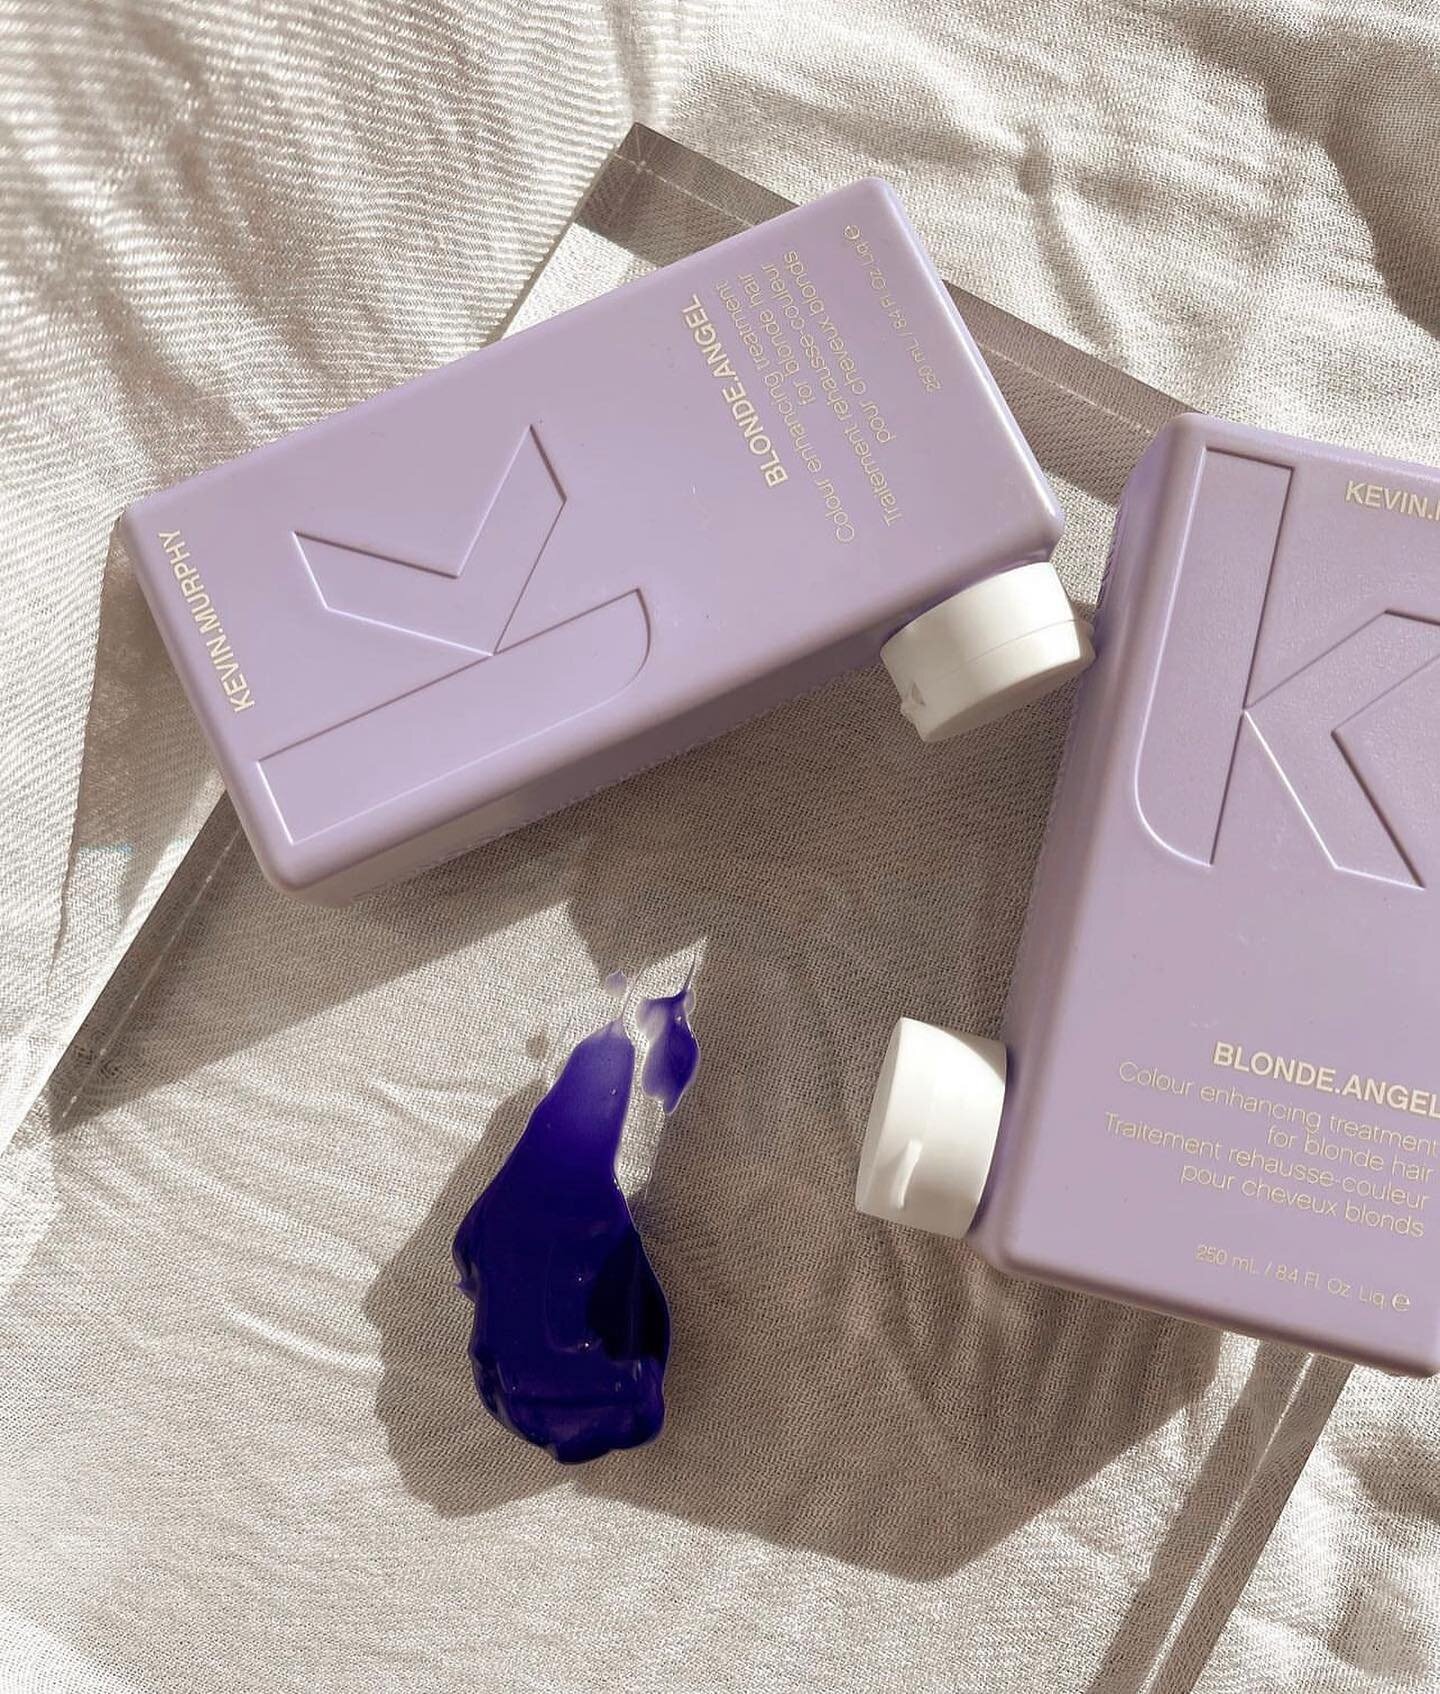 Blondes, let&rsquo;s talk purple shampoo 💜

We all know purple shampoo is a necessity in a blondes life, but are we using it correctly?

Ideally you should only be reaching for your purple shampoo once a week (maximum) or once a fortnight. 

Purple 